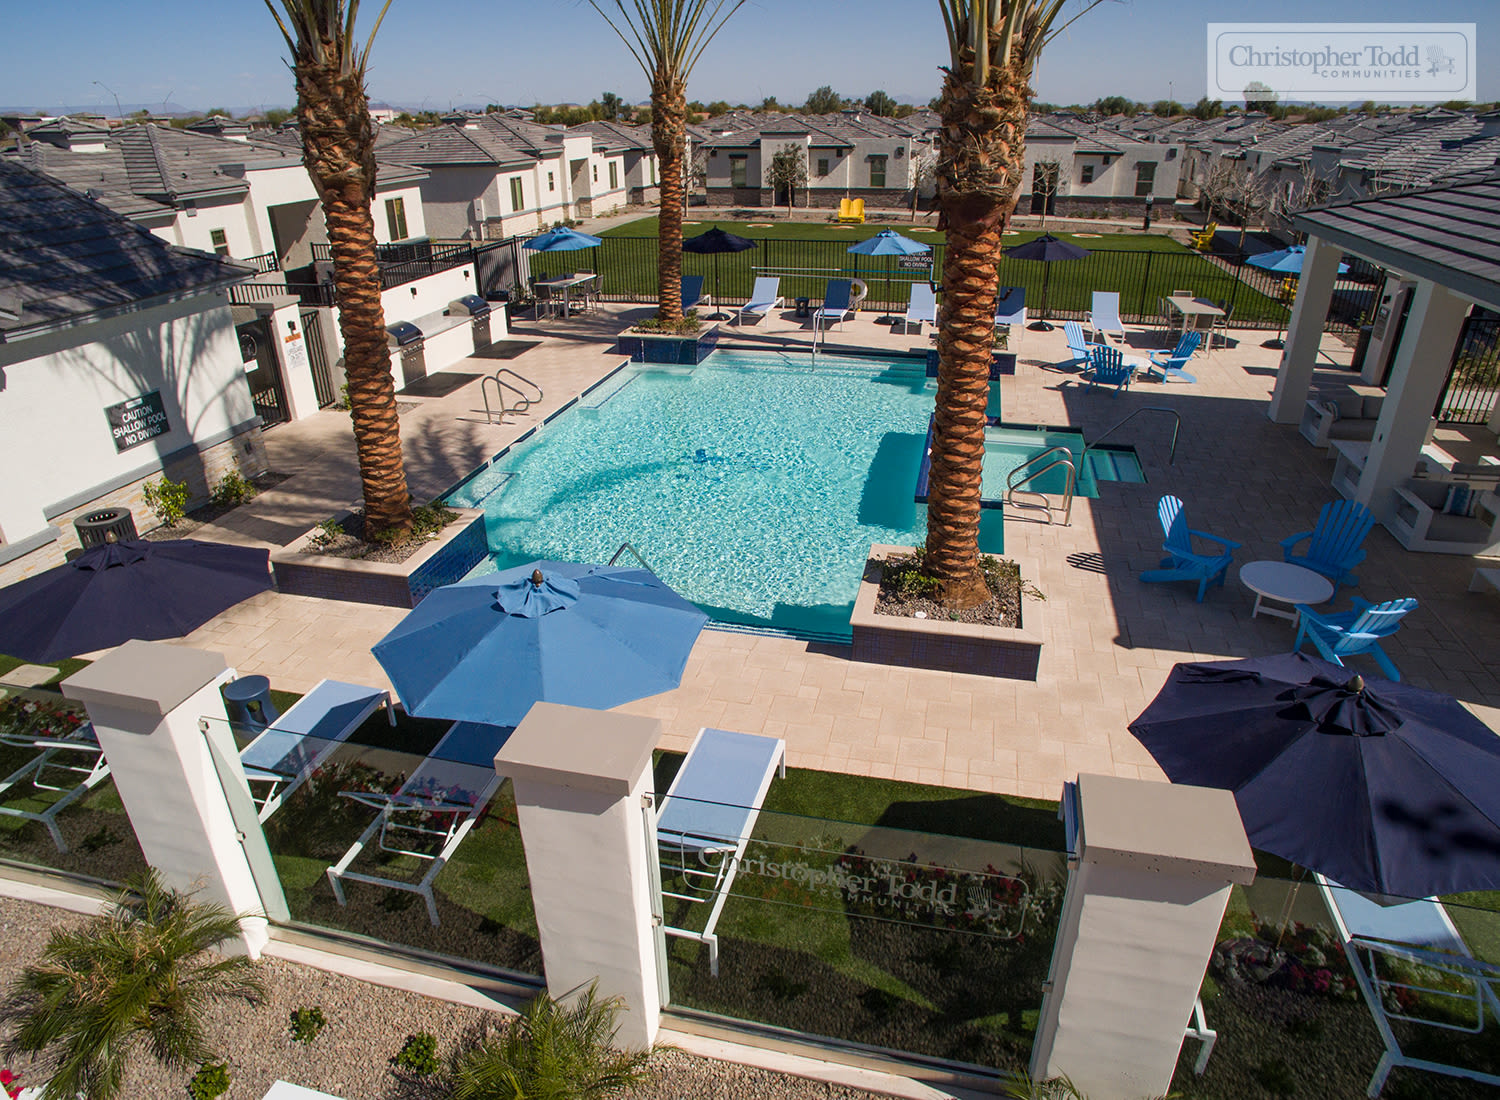 Christopher Todd Communities on Greenway apartments in Surprise, Arizona